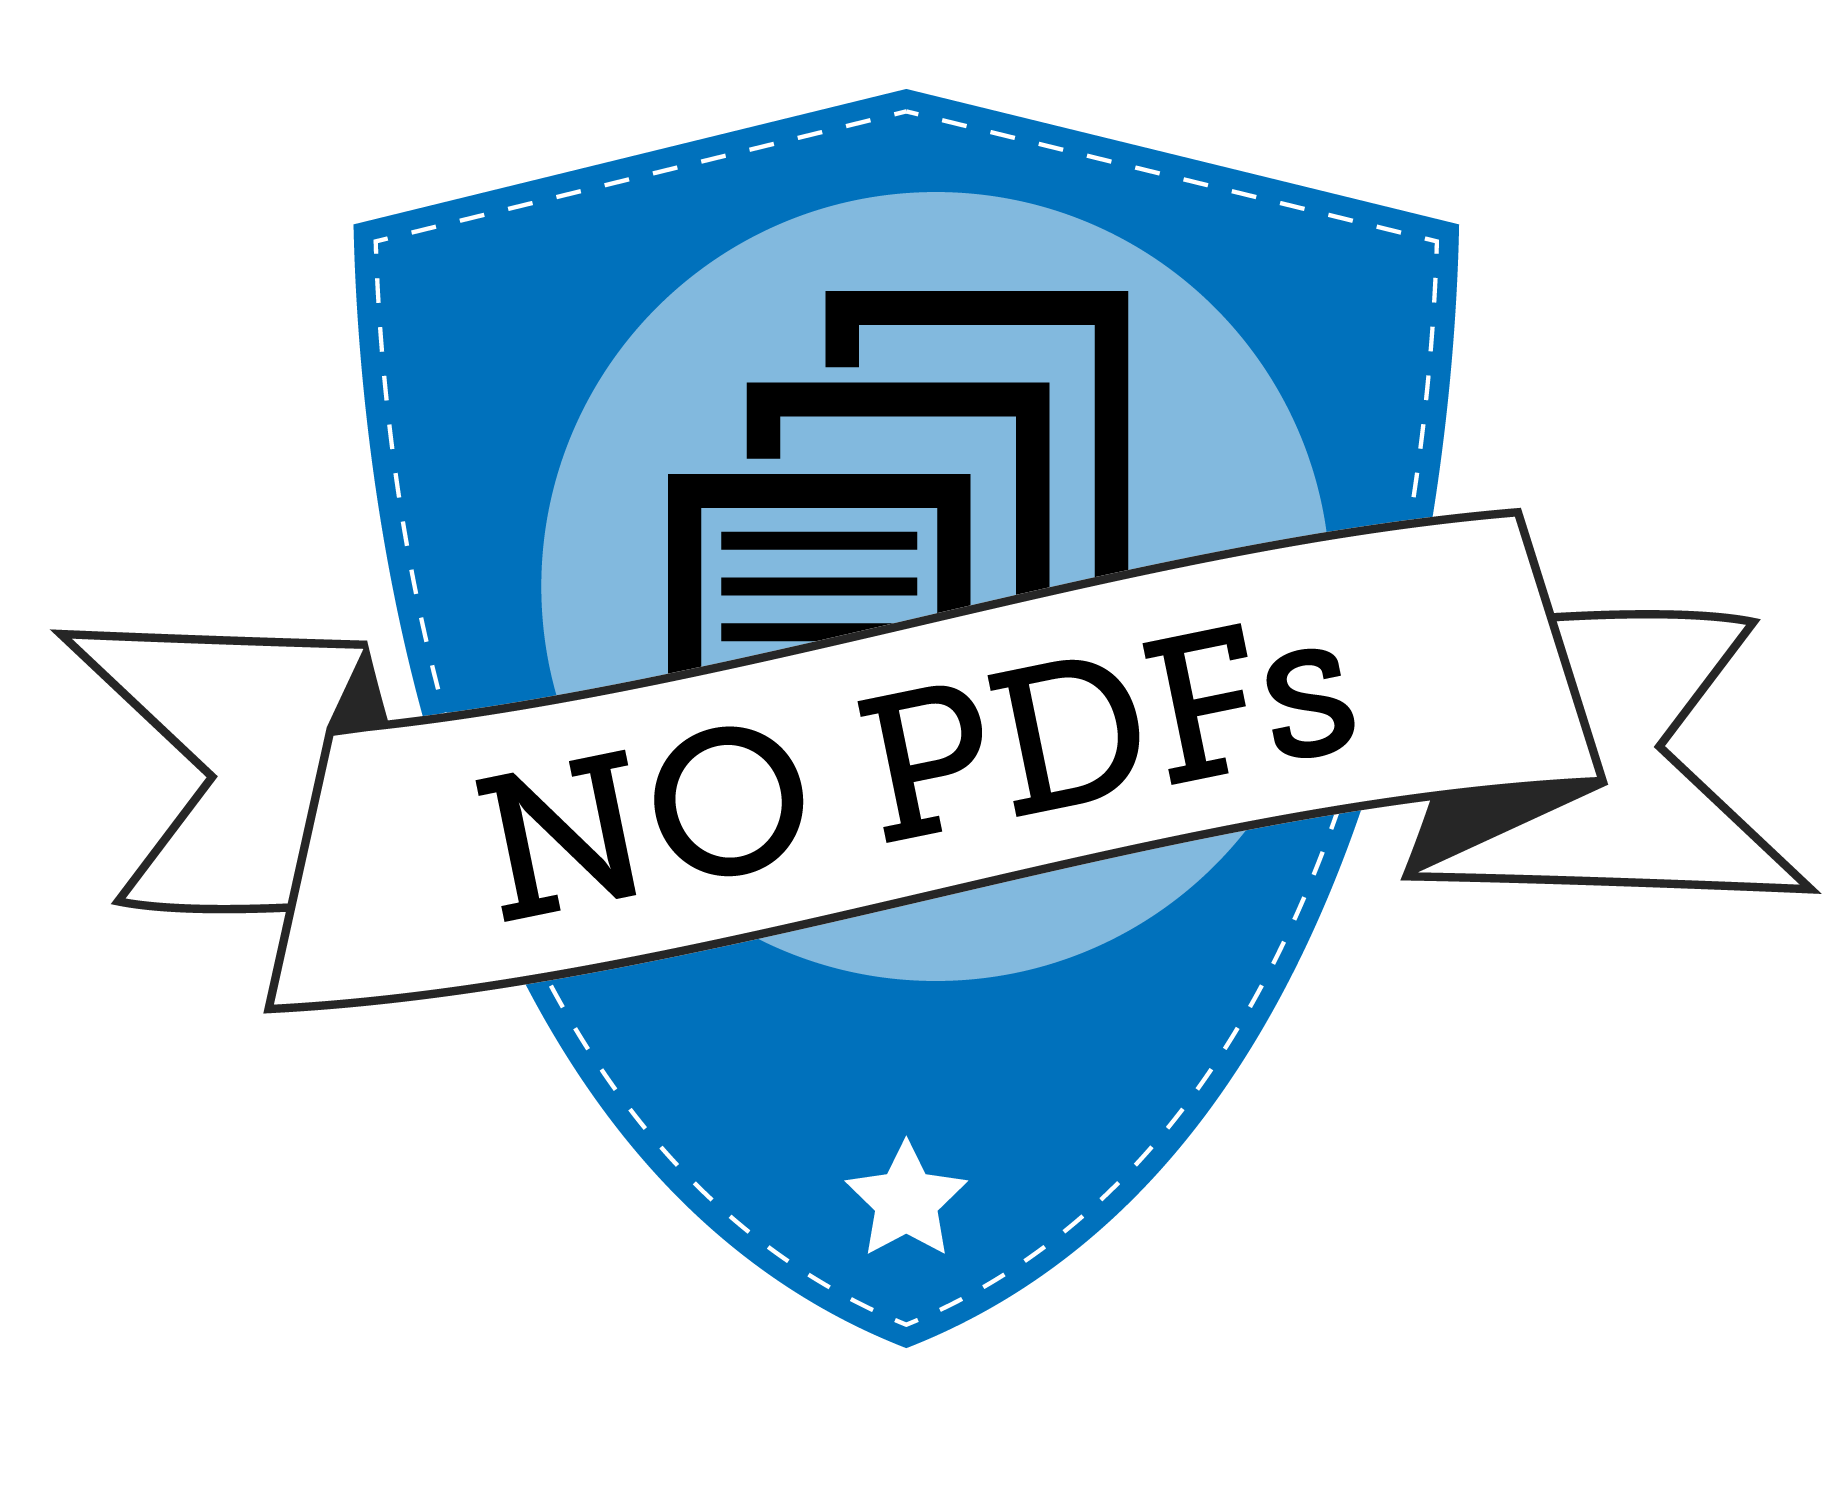 No Pdfs for legal information online - by Margaret Hagan-01